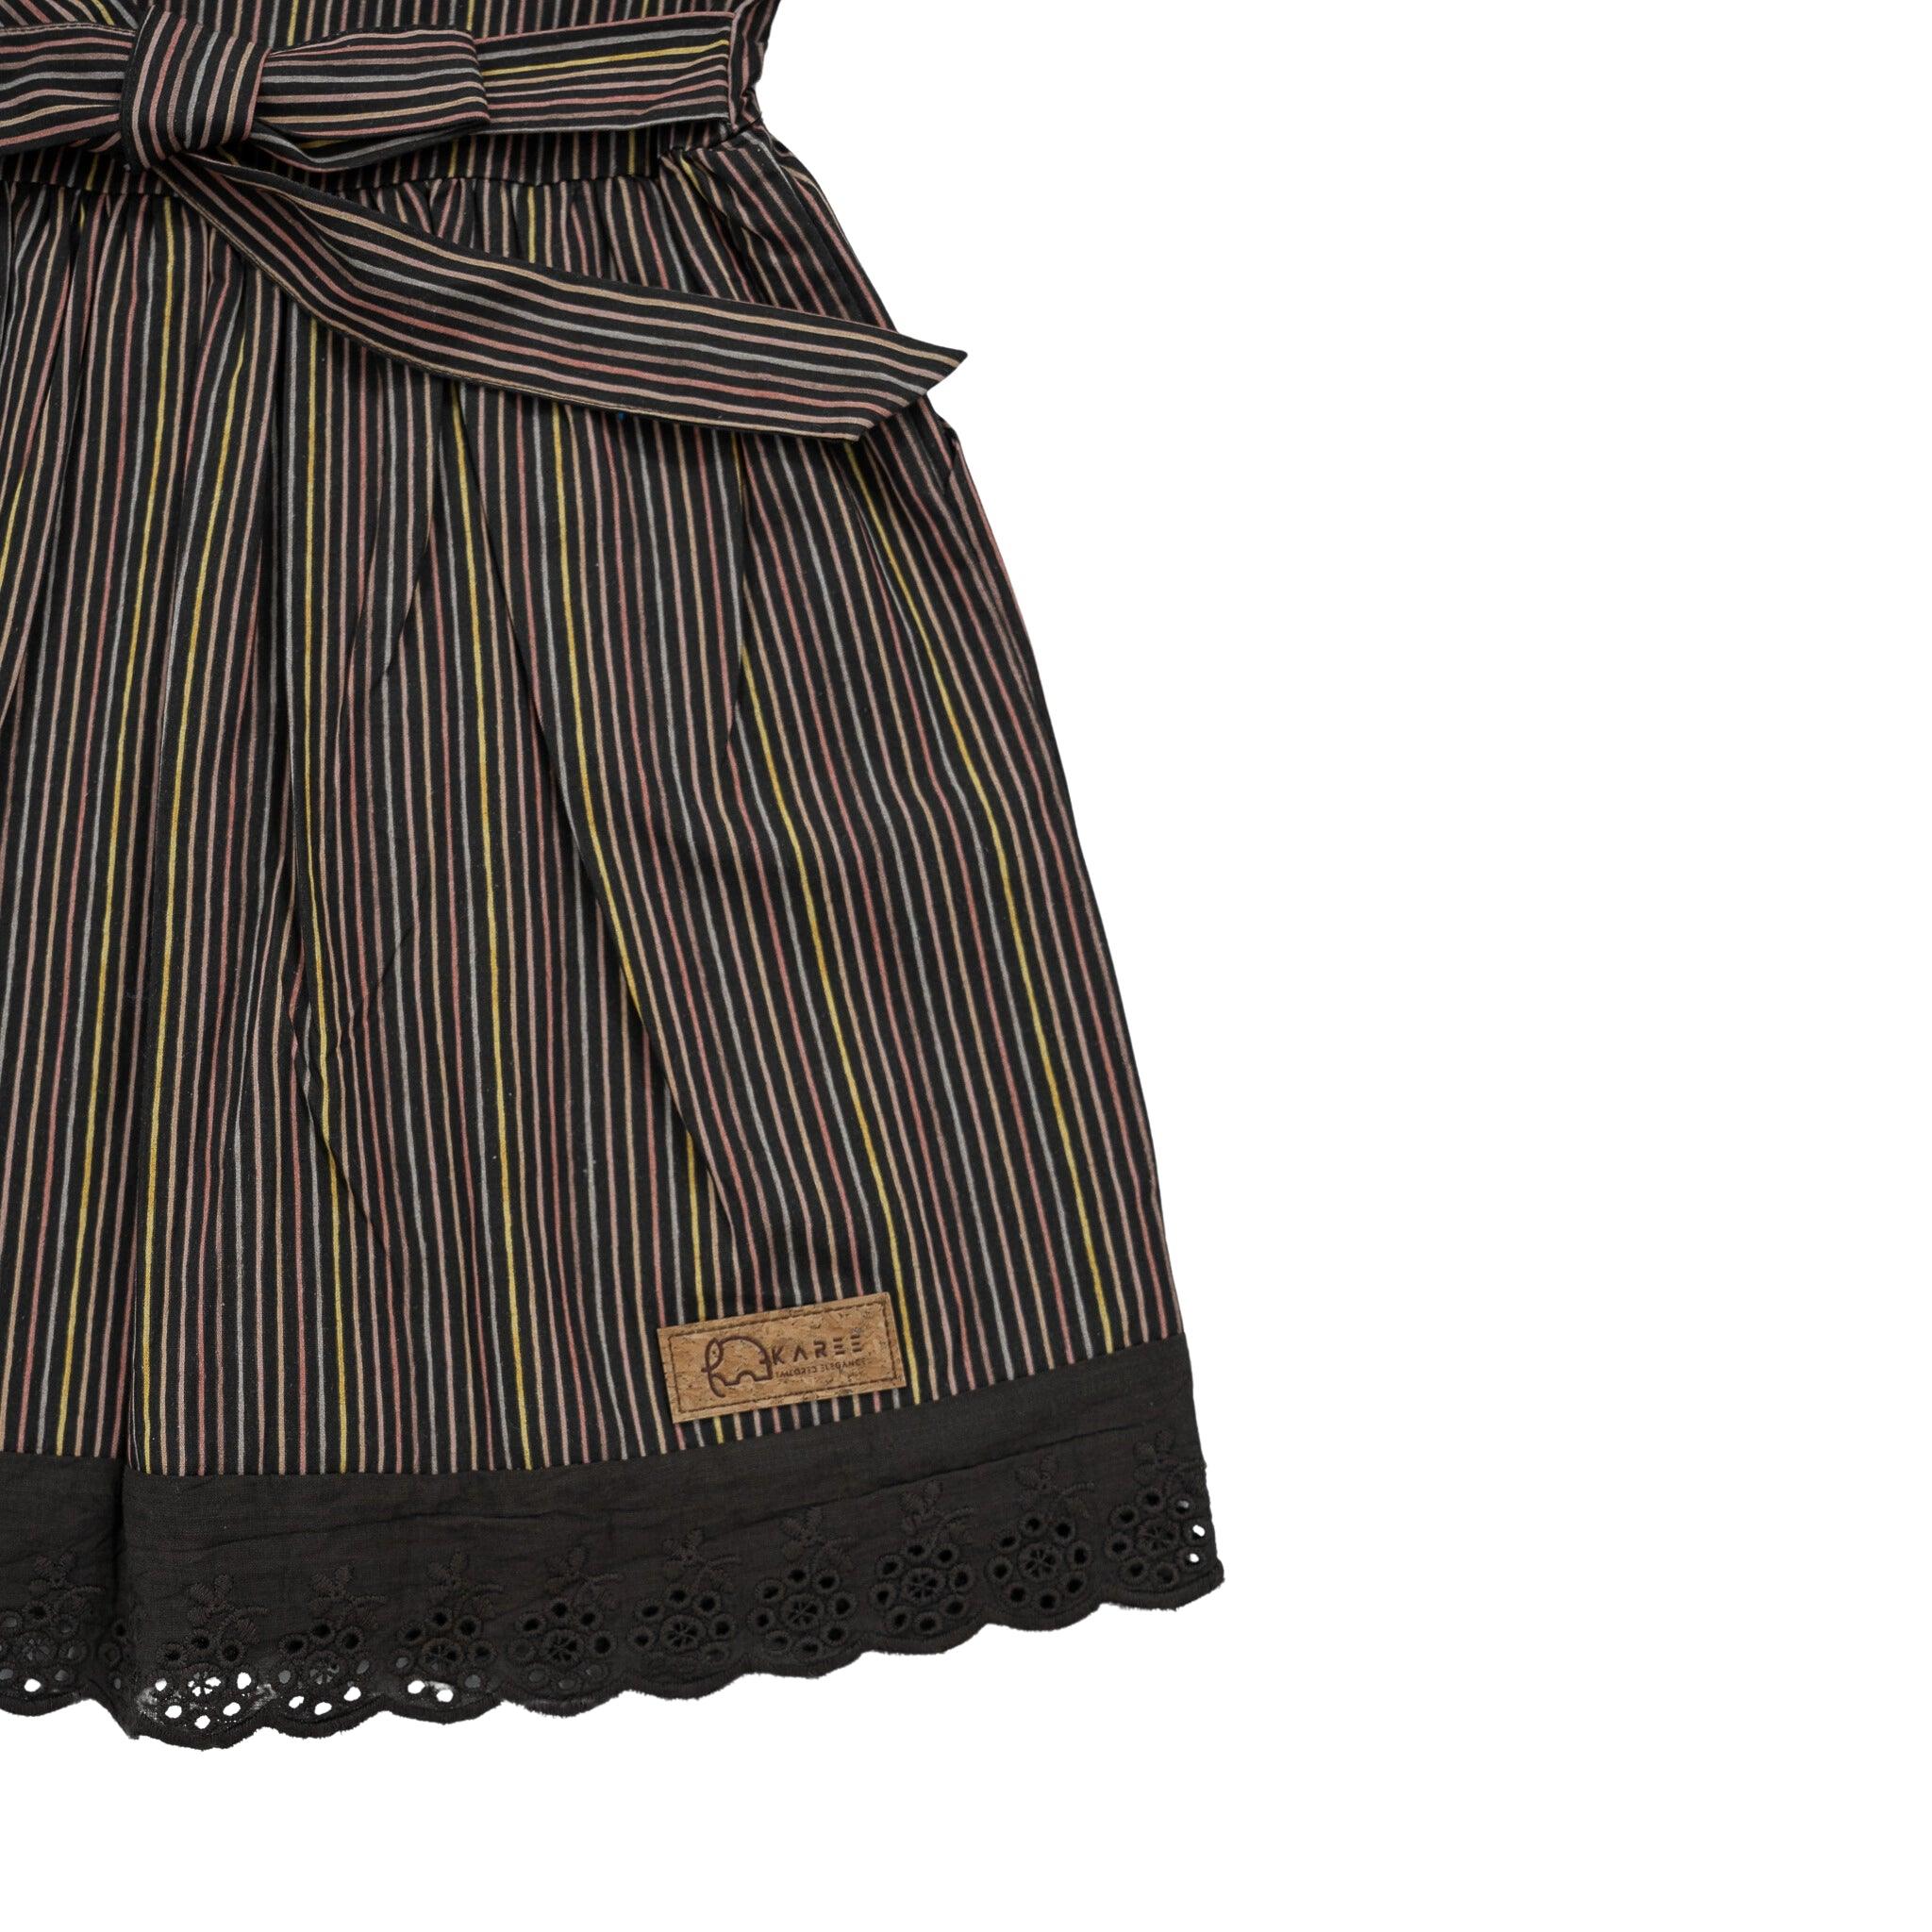 Black Striped full sleeve Cotton Dress with lace trim and a "Karee" label attached, made from premium cotton, isolated on a white background.